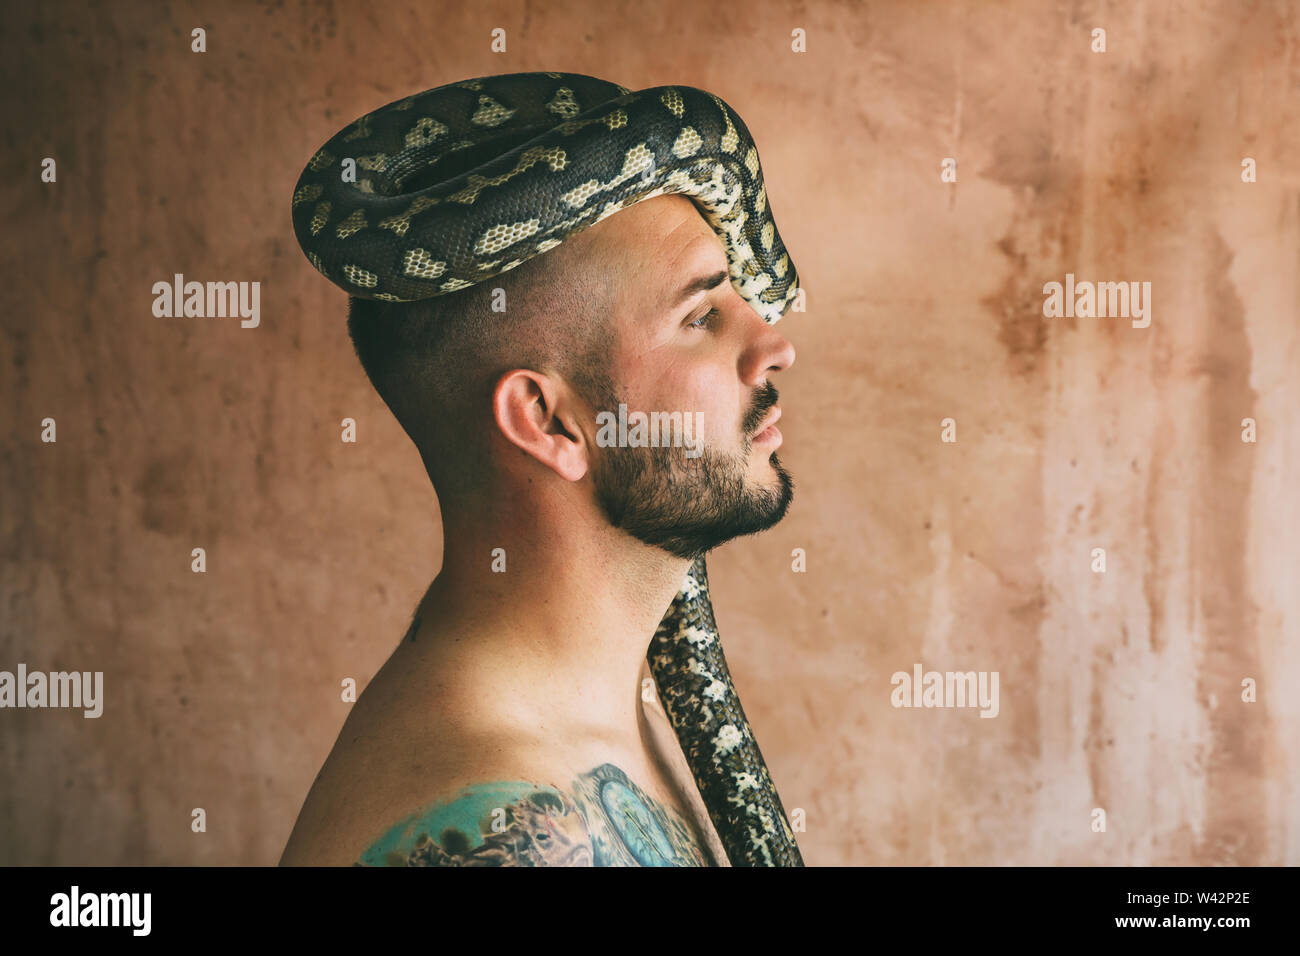 man posing with snake on his head Stock Photo